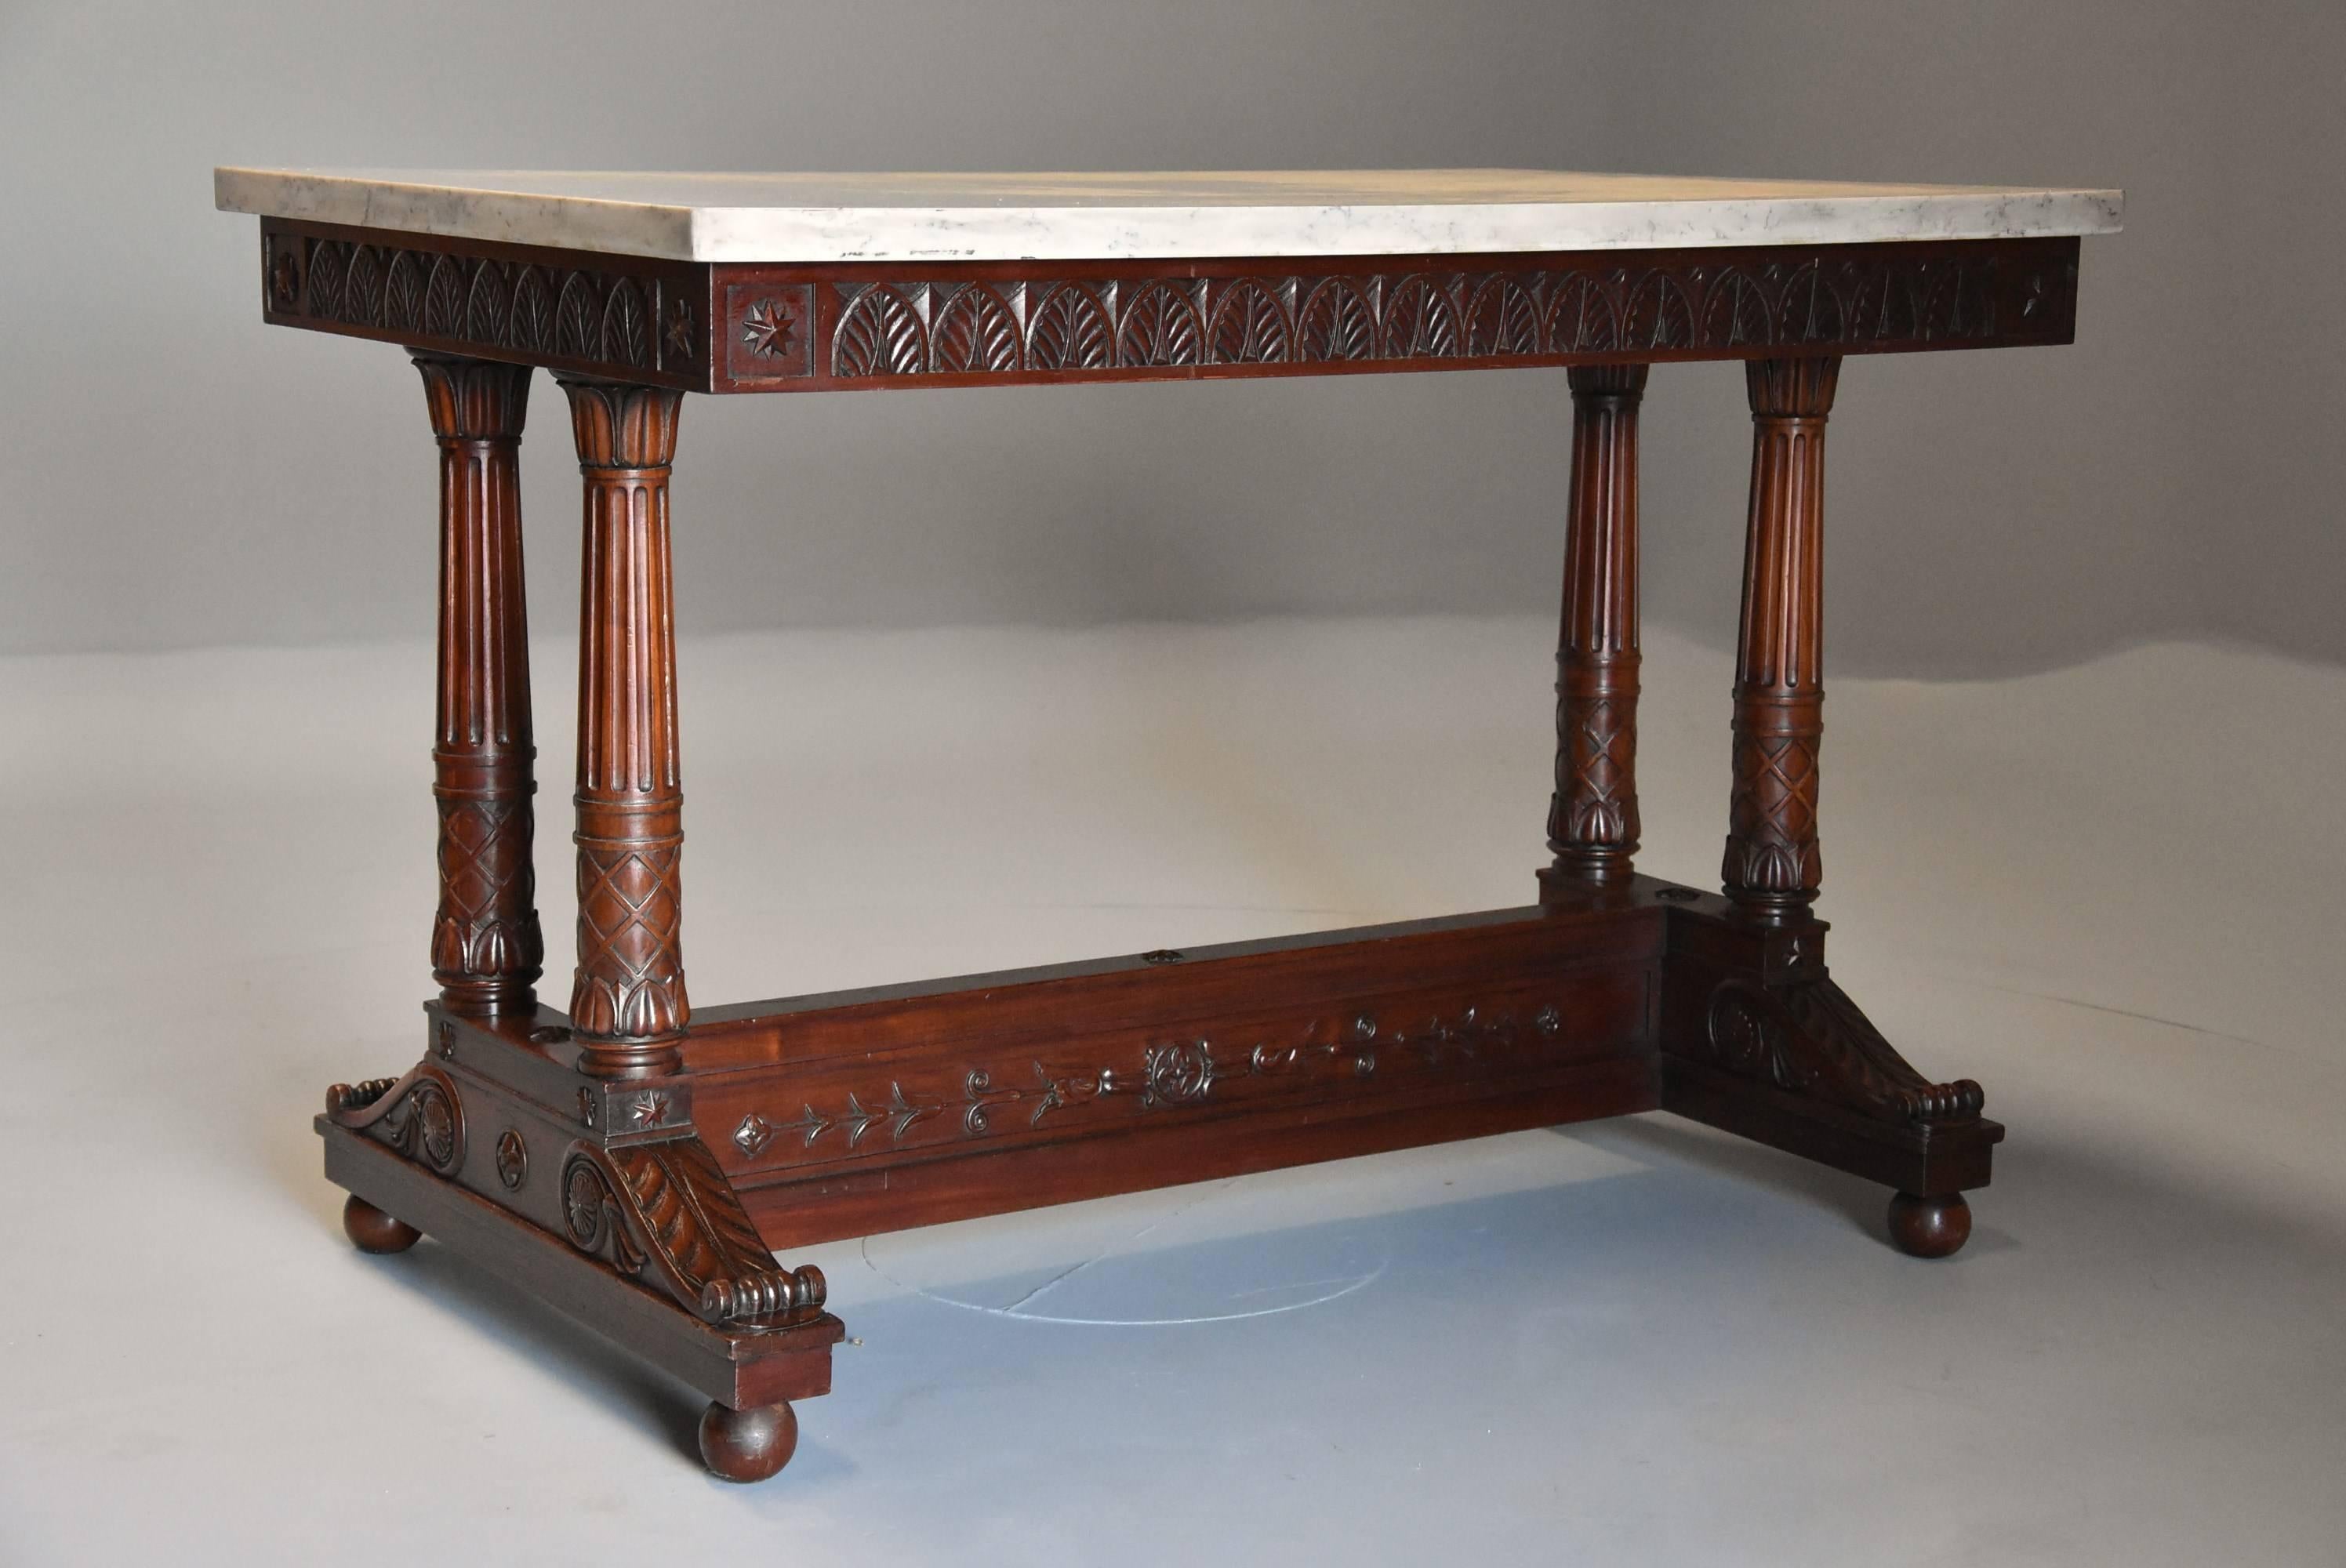 A rare and fine quality early 19th century (circa 1815) French Empire centre table with marble top with Egyptian influences of oblong form, stamped 'JACOB'.

This table consists of an off white marble top of oblong form supported on a mahogany